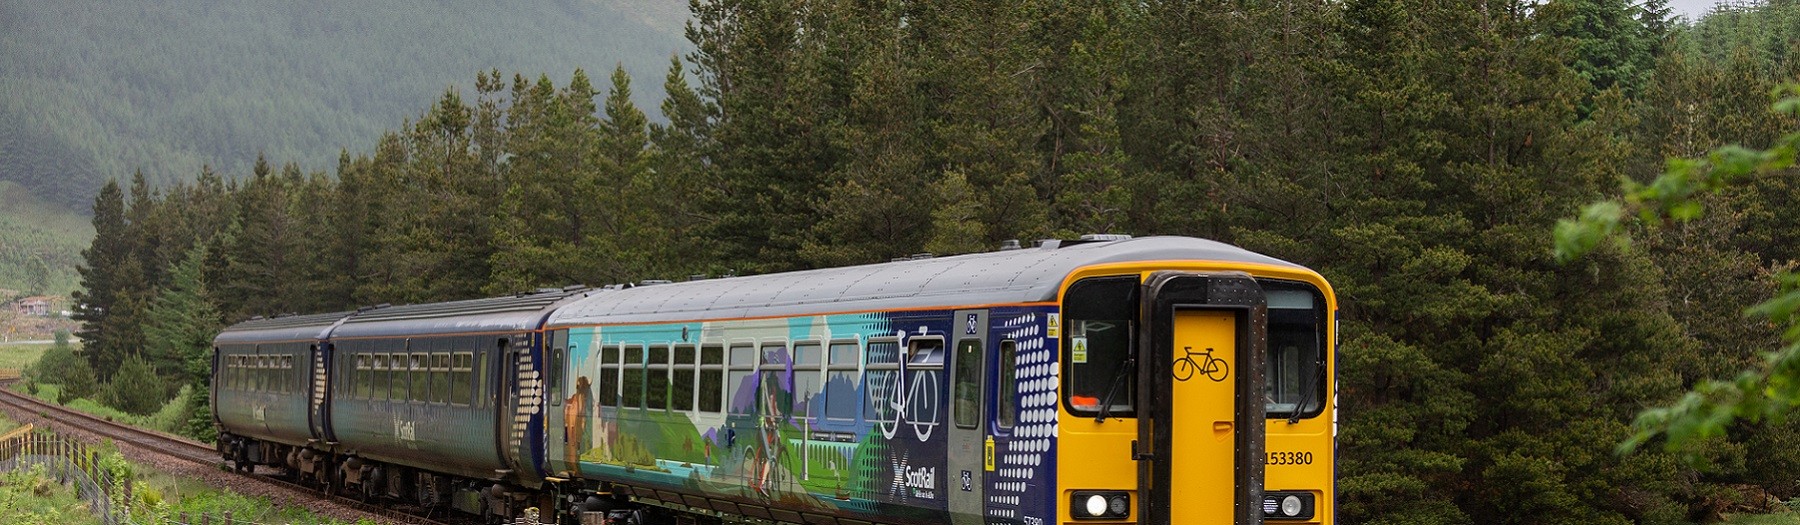 ScotRail Highland Explorer carriage with a scenic backdrop